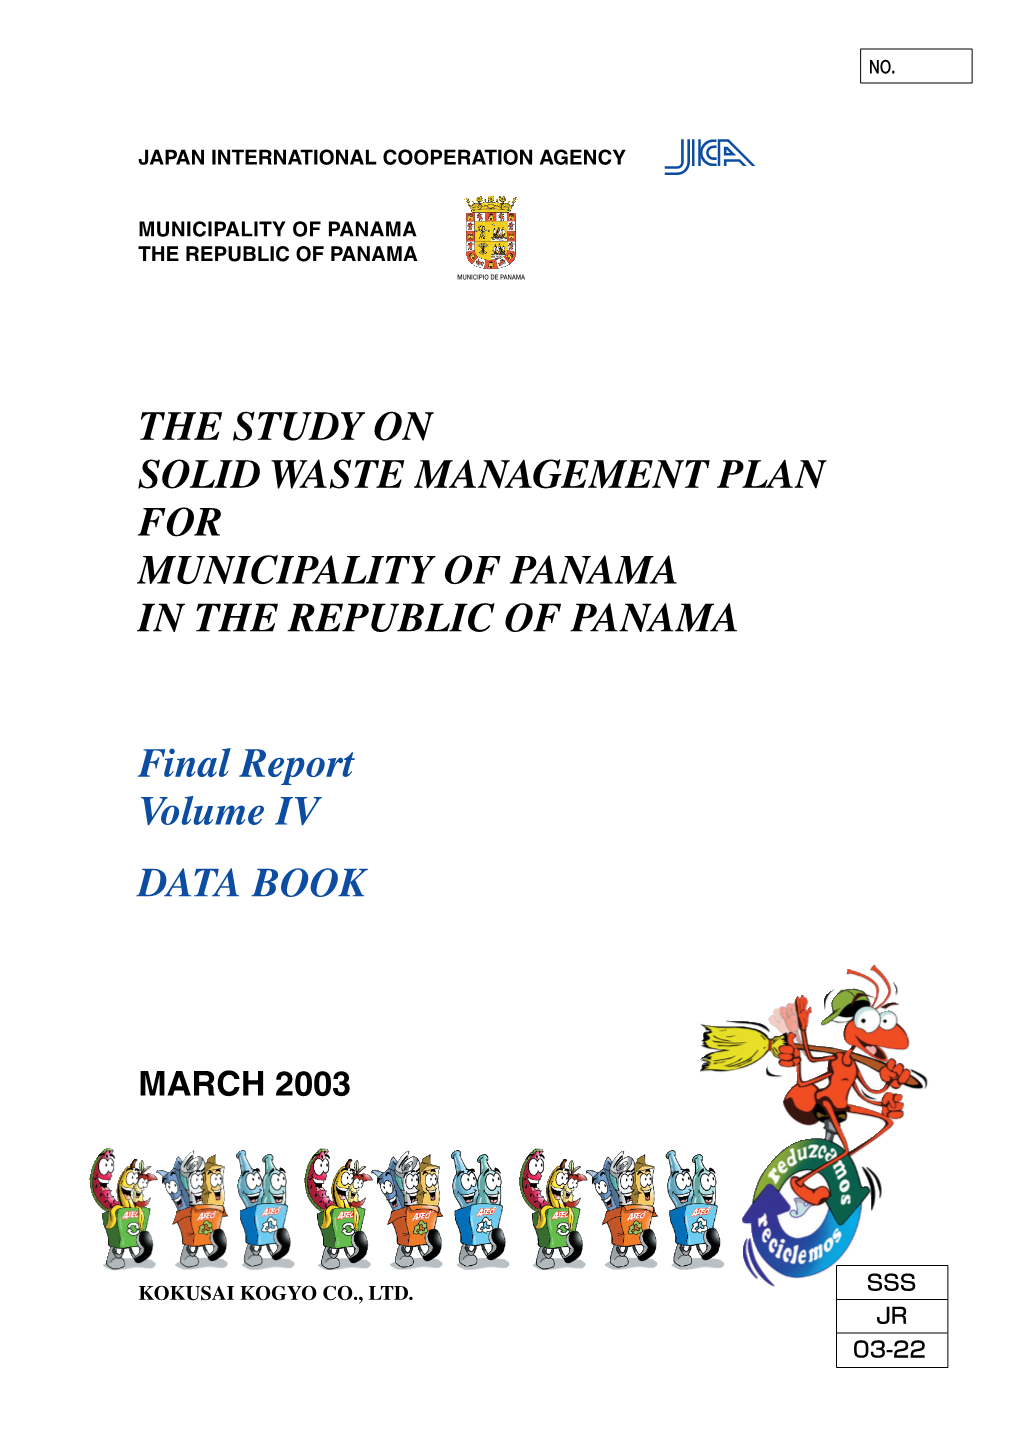 The Study on Solid Waste Management Plan for Municipality of Panama in the Republic of Panama